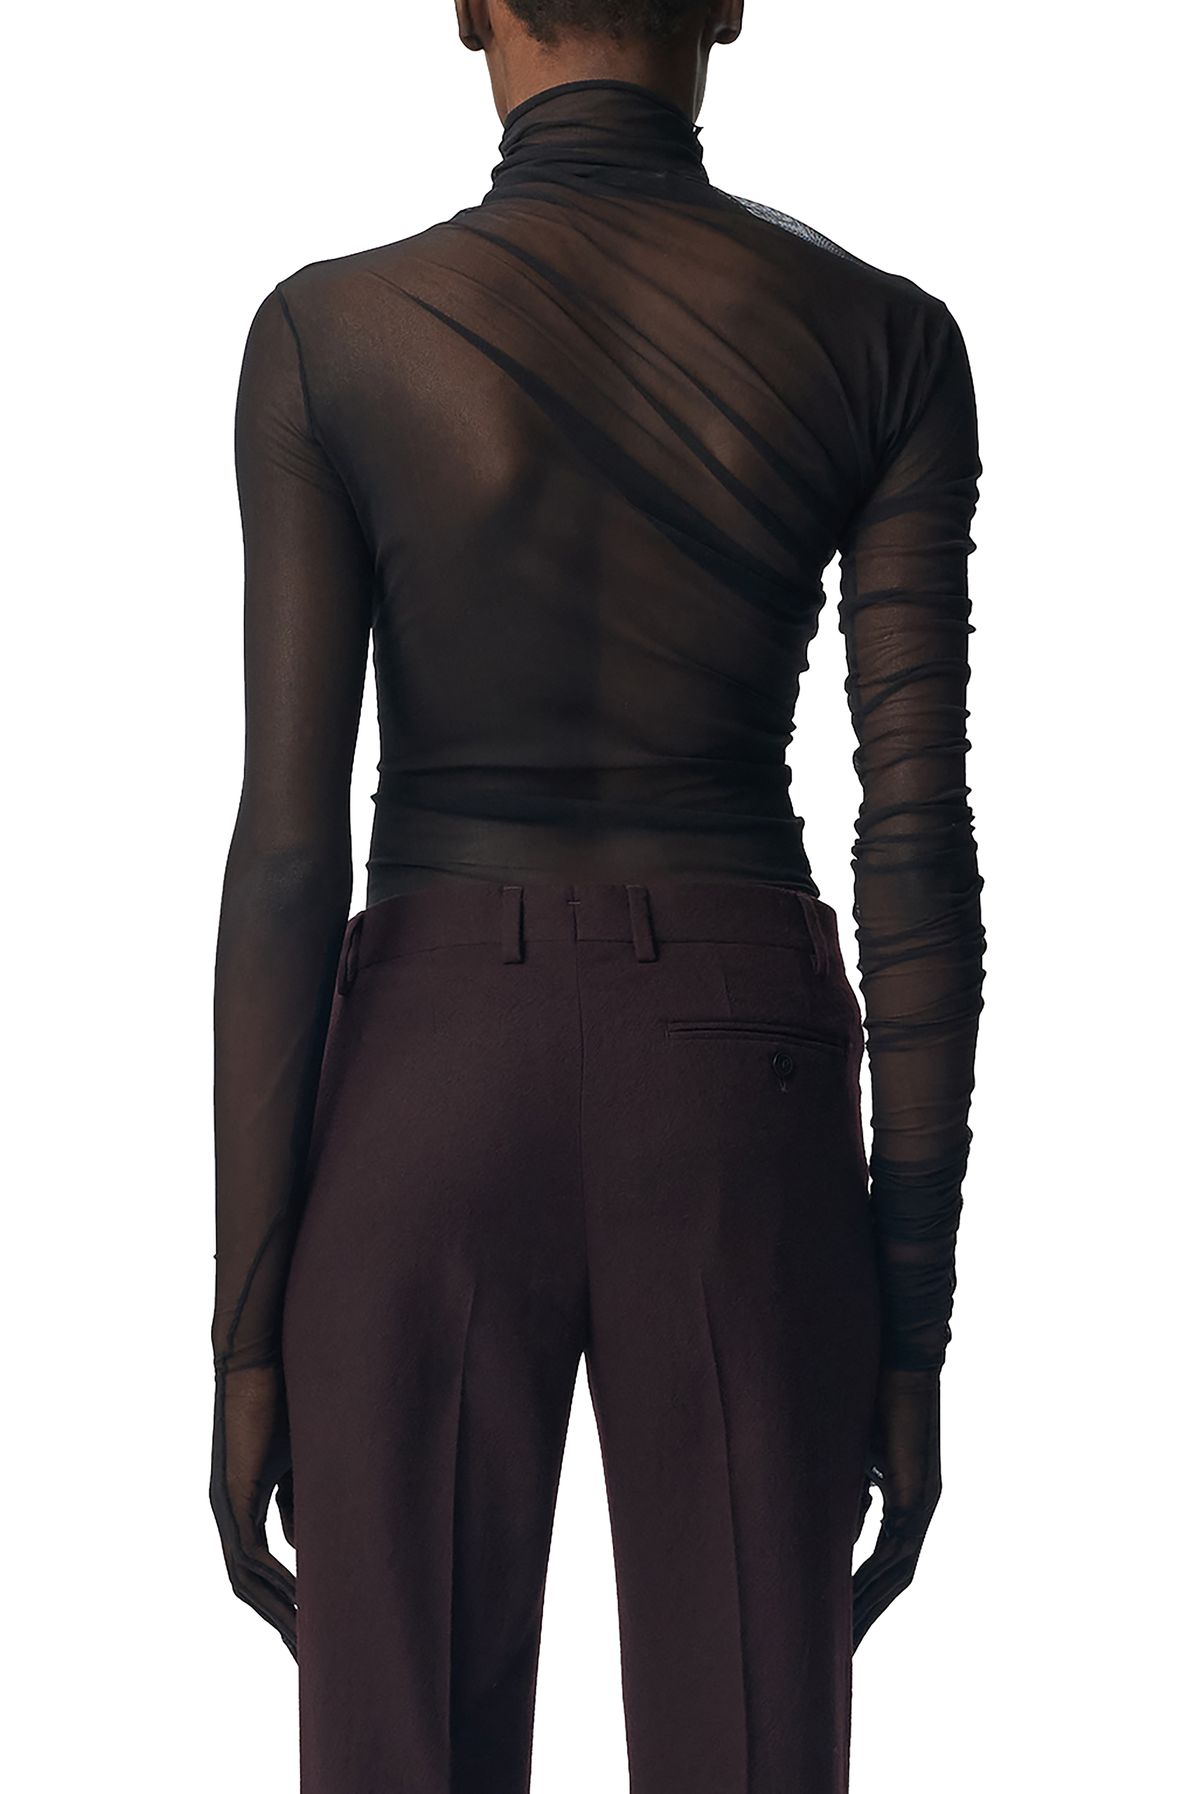 Ann Demeulemeester Xenia Draped T-Shirt With Gloved Long Sleeves